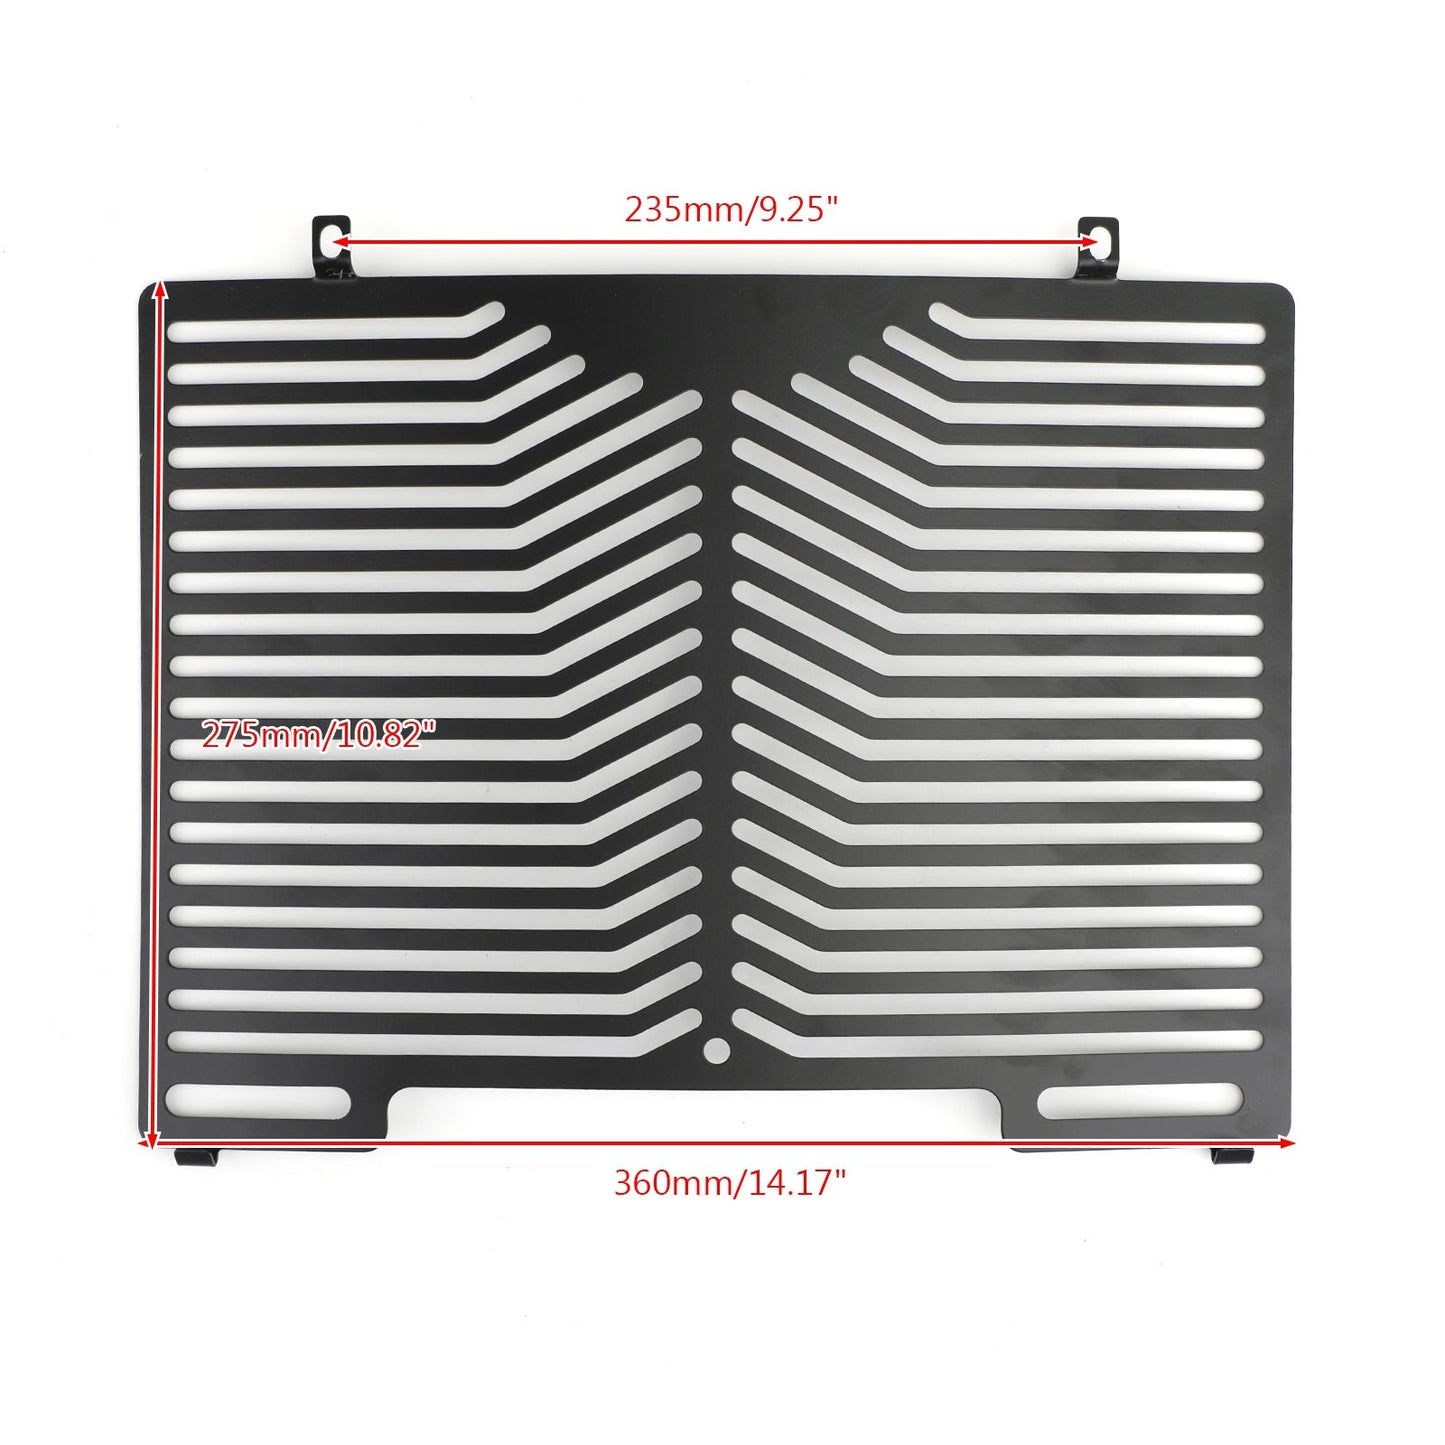 Stainless Steel Radiator Guard Protector Grill Cover Fit For Honda VFR1200 X Cross Tourer 2012-2019